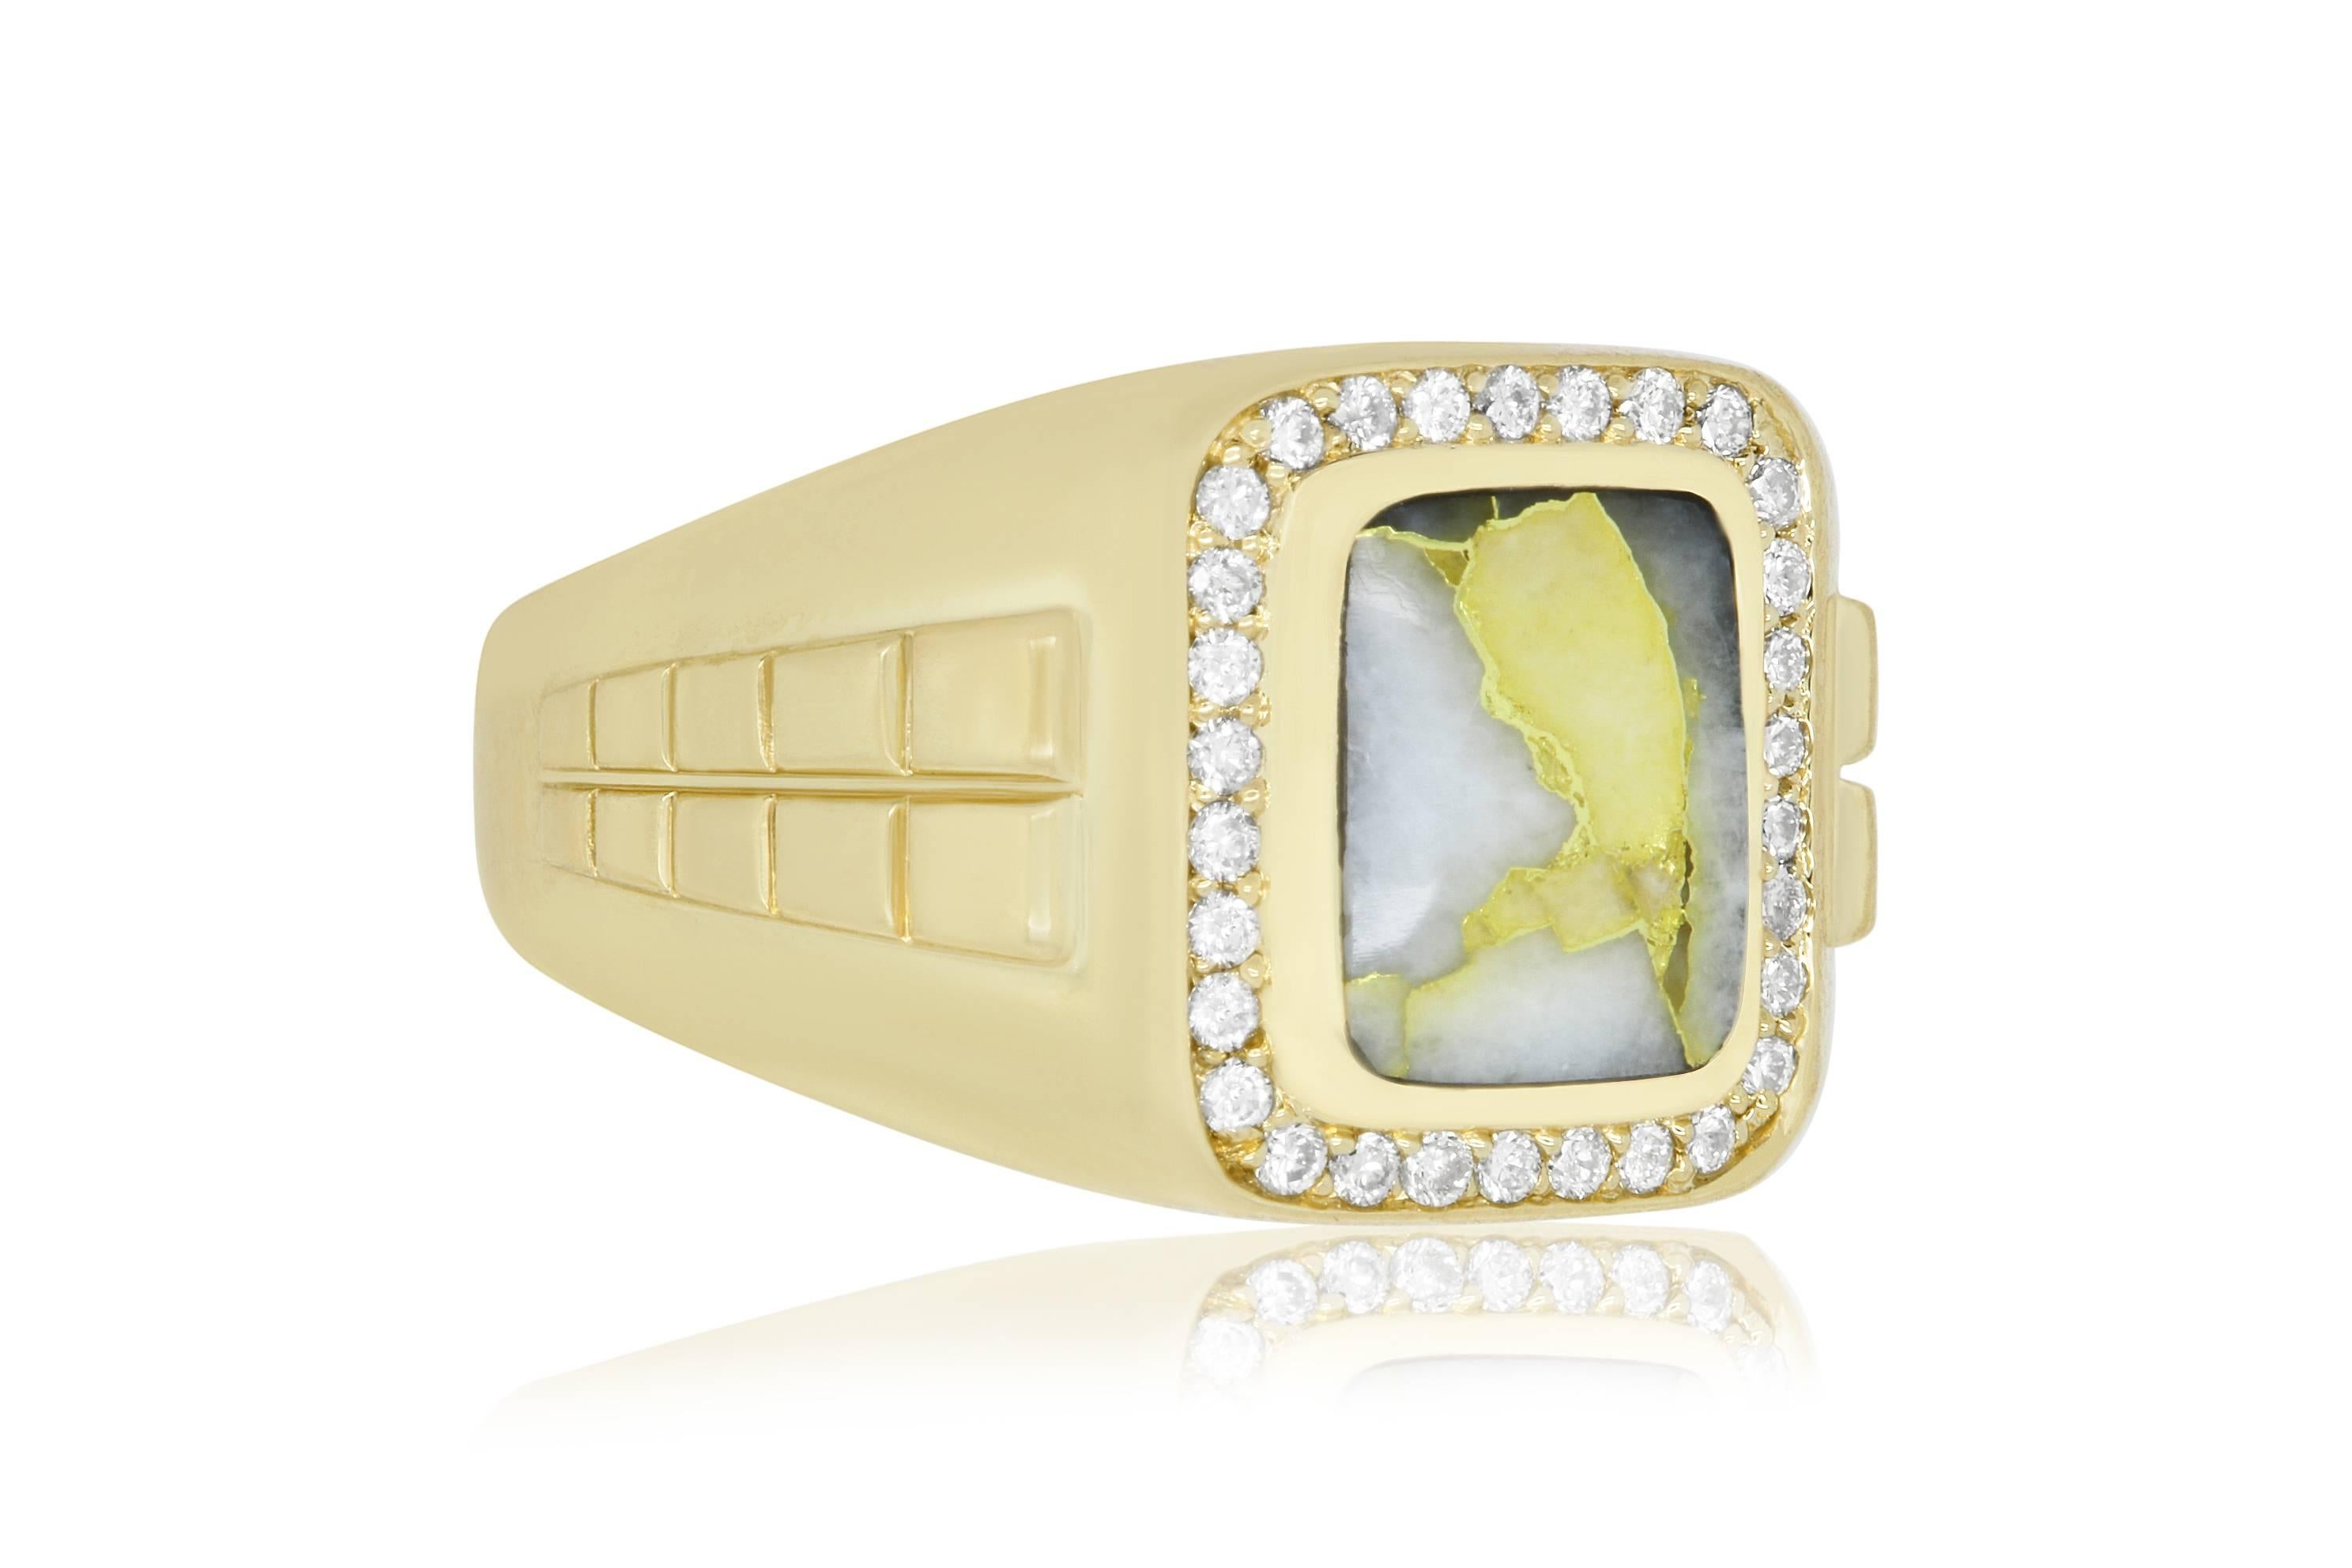 This unique Gold in Quartz stone weighs in at 2.10 carats. Set in a 14k Yellow Gold with 30 white diamonds, it is a guaranteed show stopper!

Material: 14k Yellow Gold
Gemstones: 1 Rectangular Gold in Quartz at 2.10 Carats.
Diamonds: 30 Brilliant